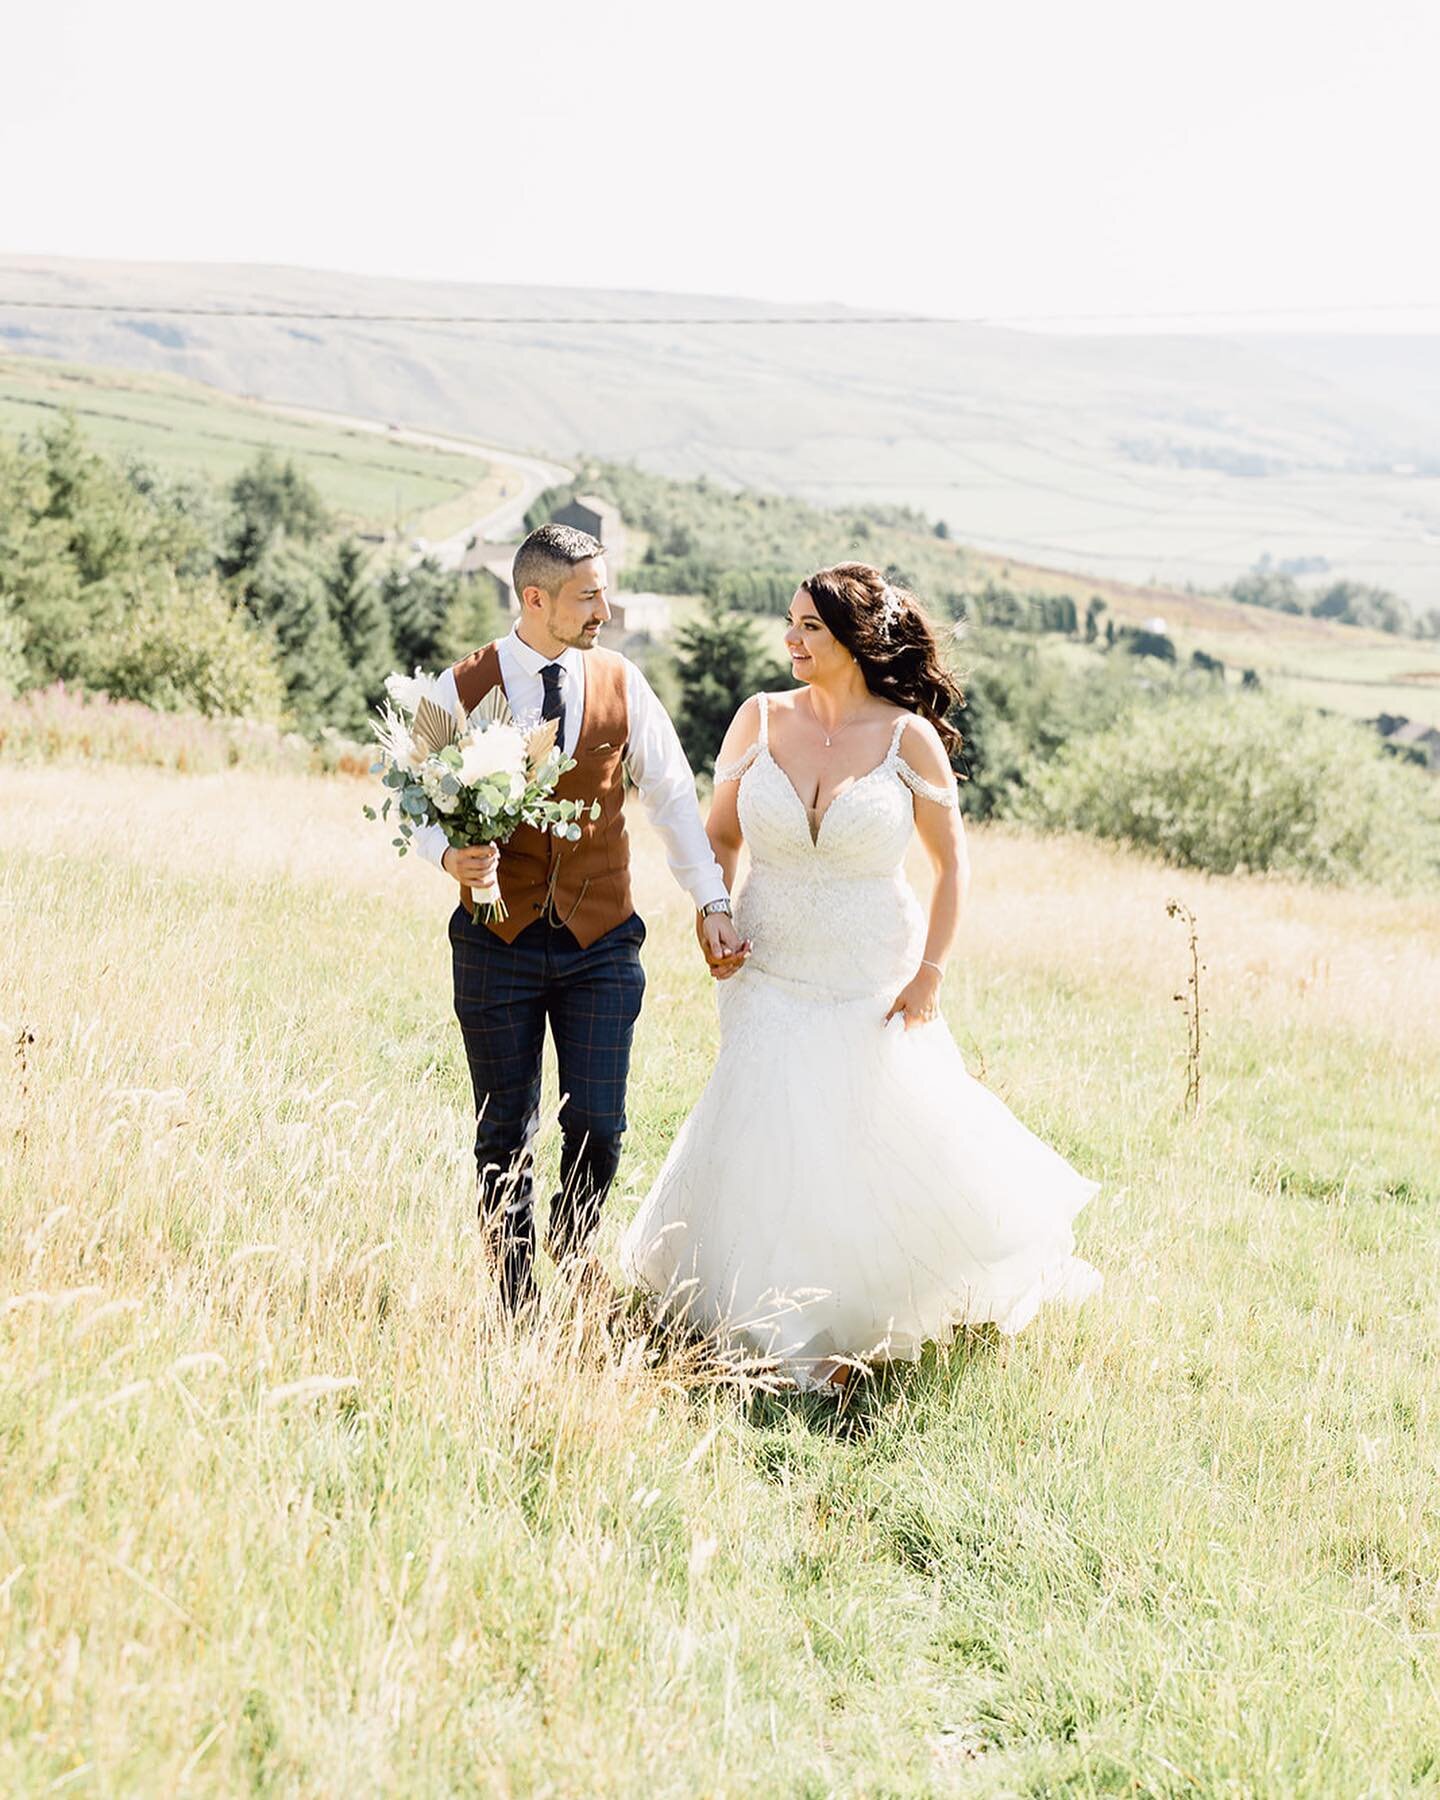 B e c k y &amp;  G a r y

Huge congratulations to becky and Gary who got married in Saddleworth last weekend! What a stunning day! 🤍 
.
.
.
.
.
@saddleworthgolfclub19 @crystalandpearlboutique @laceandfavour @marcdarcysuits @blushboutiqueweddings @ch